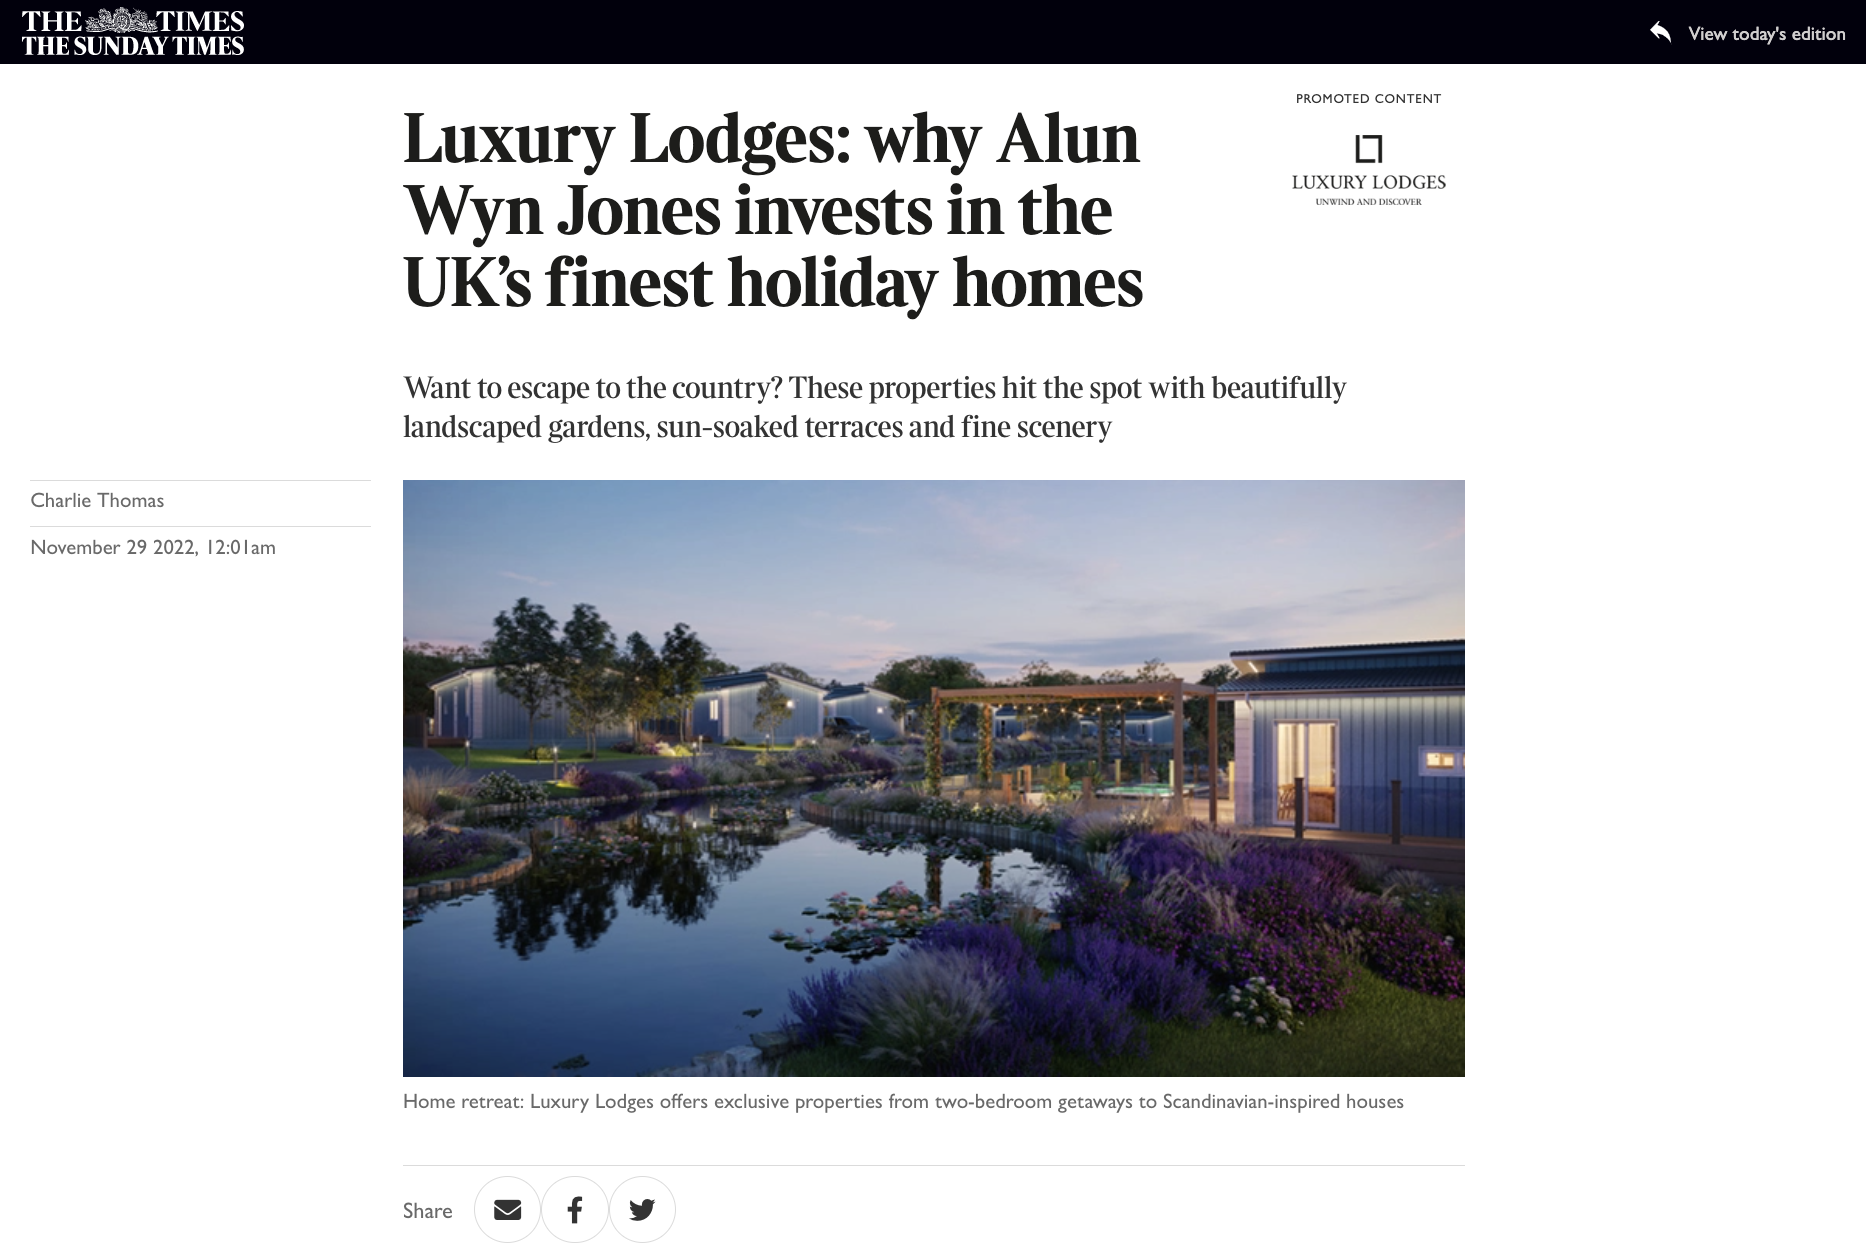 The Times: Luxury Lodges: The UK's finest holiday homes